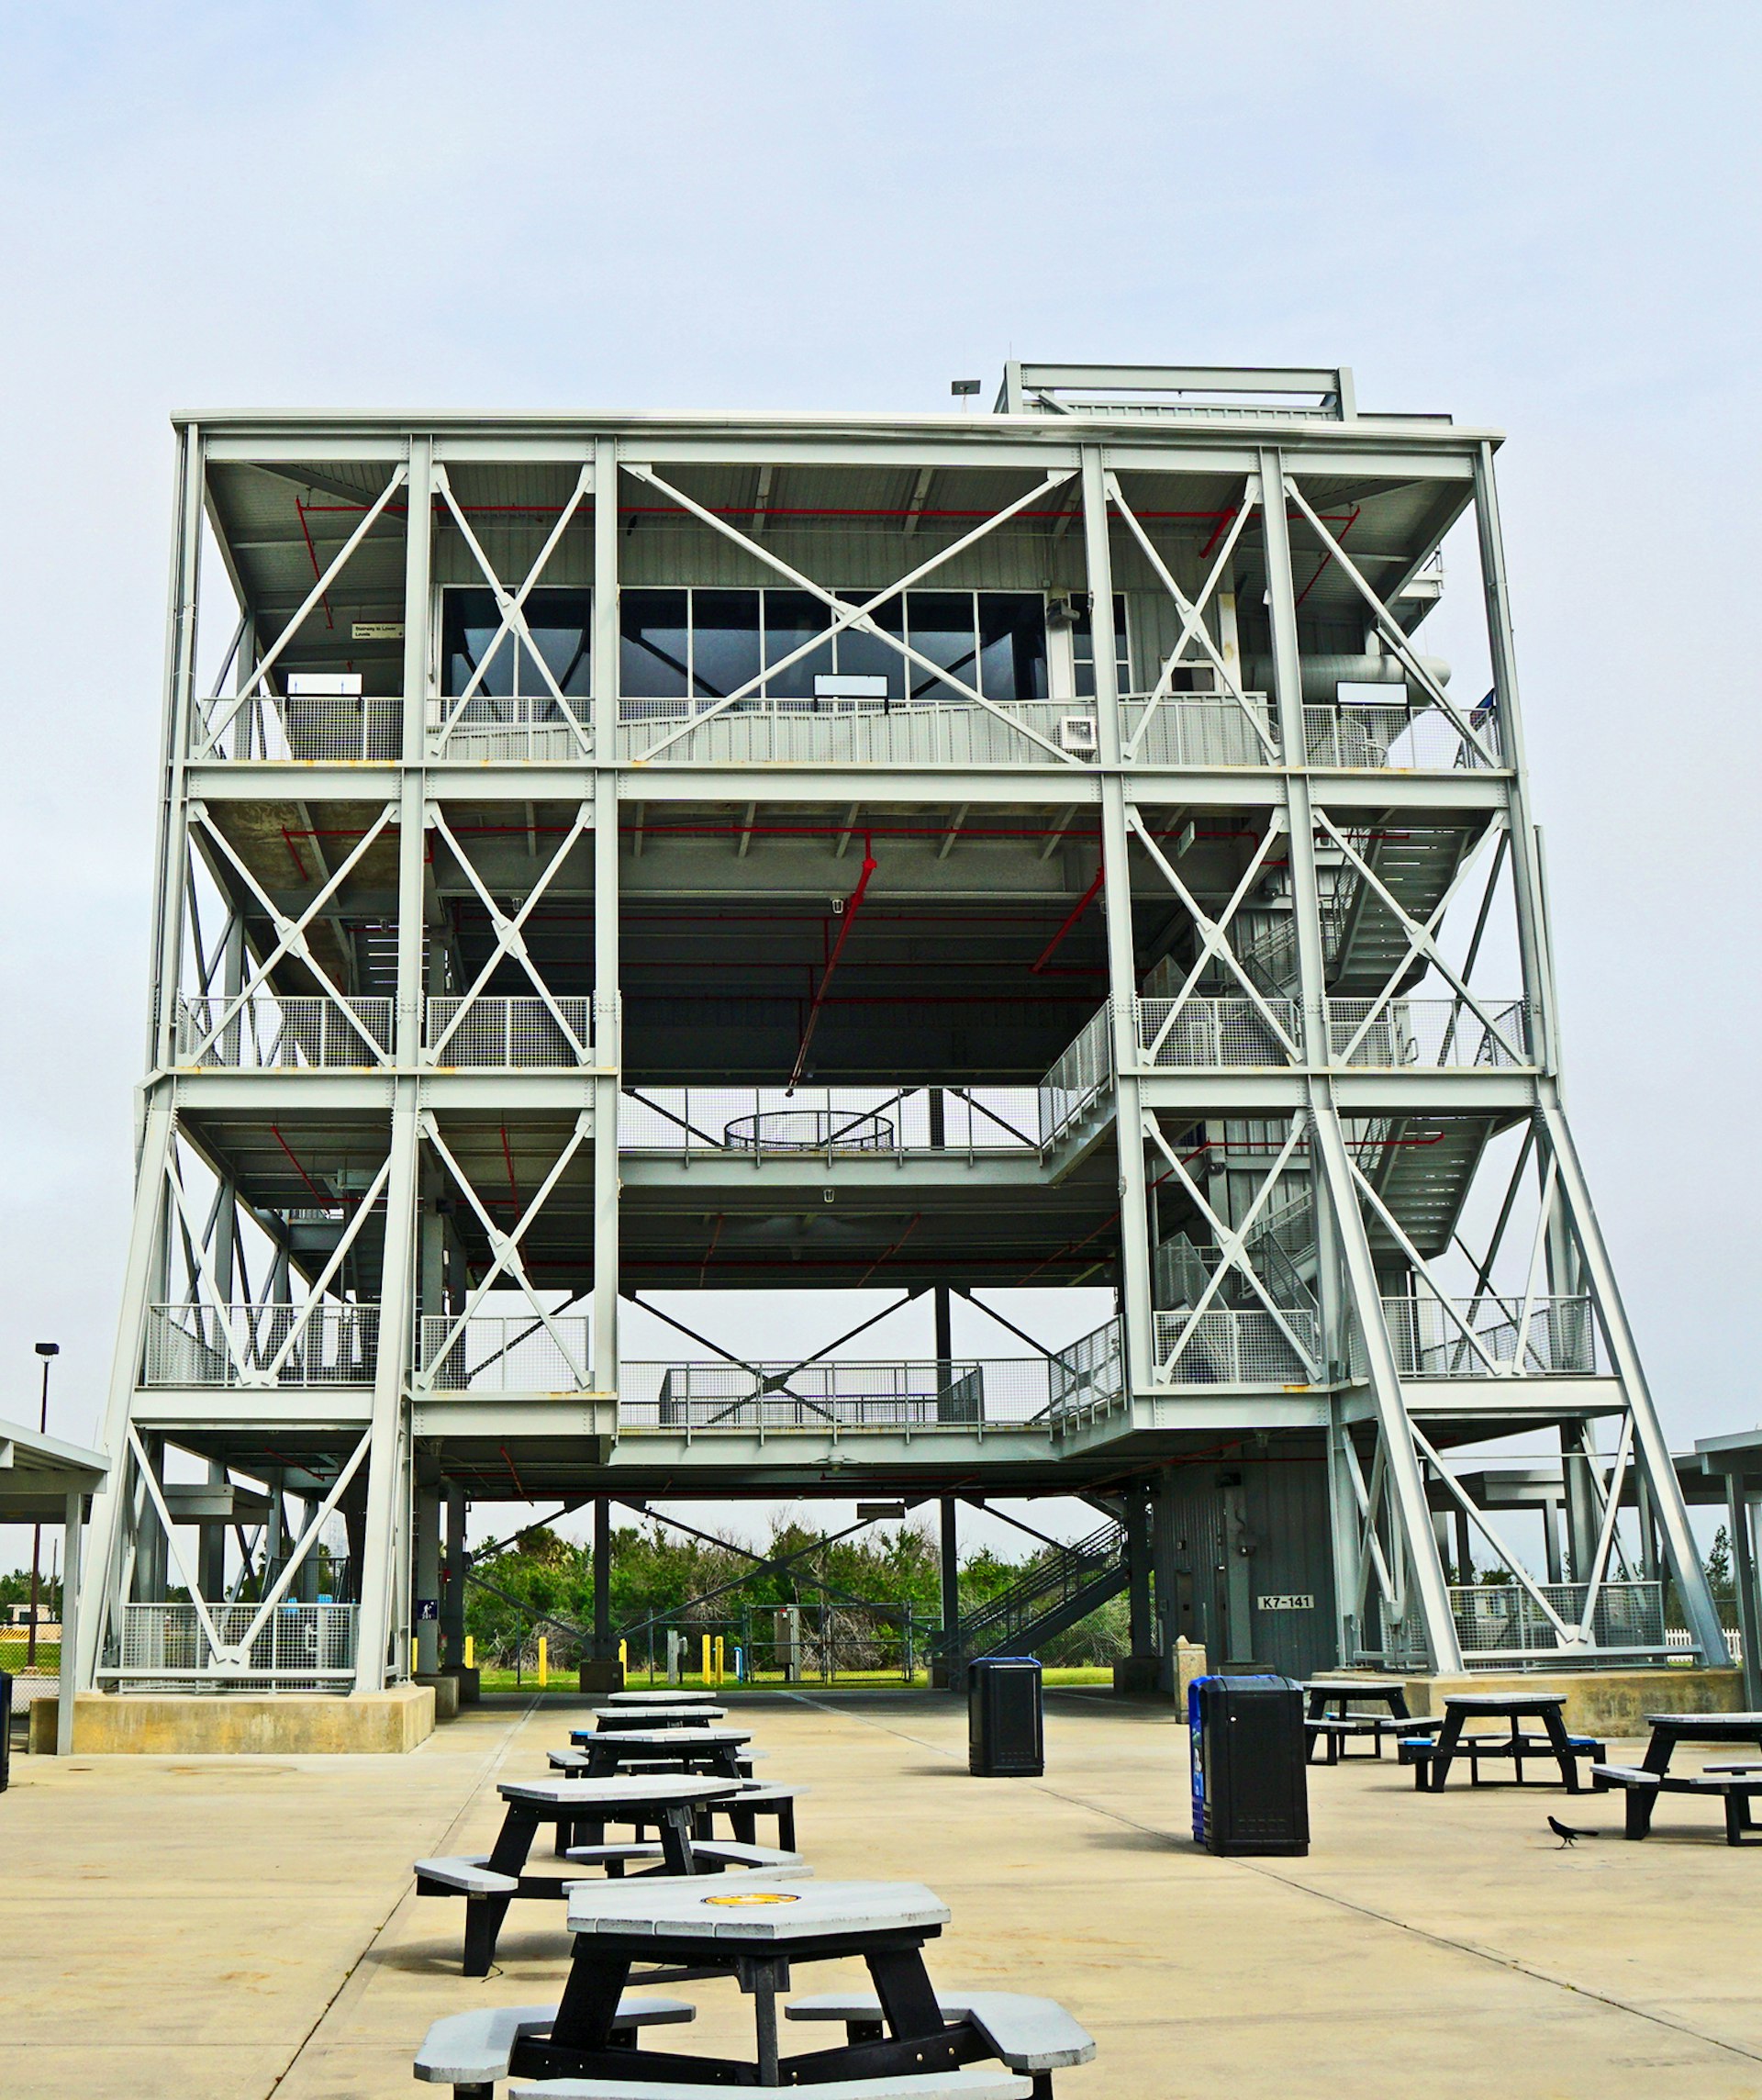 rear view of the LC-39 observation gantry on a gray day, with a few picnic tables scattered around; how to experience a rocket launch in Florida